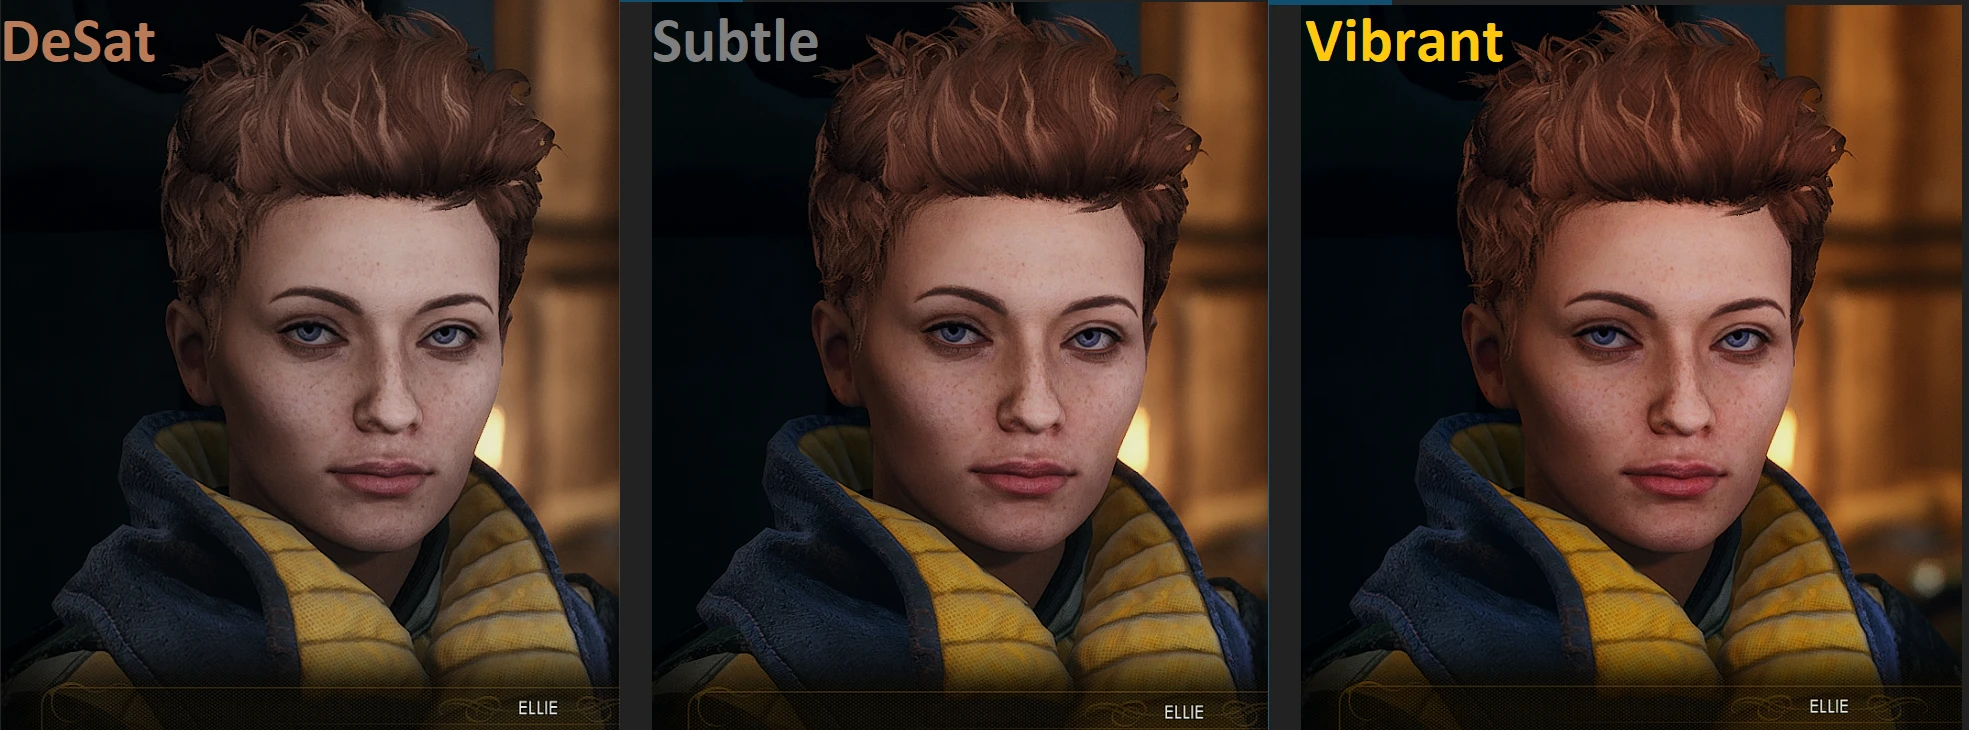 Subtle ReShade Options Mod - The Outer Worlds Mods